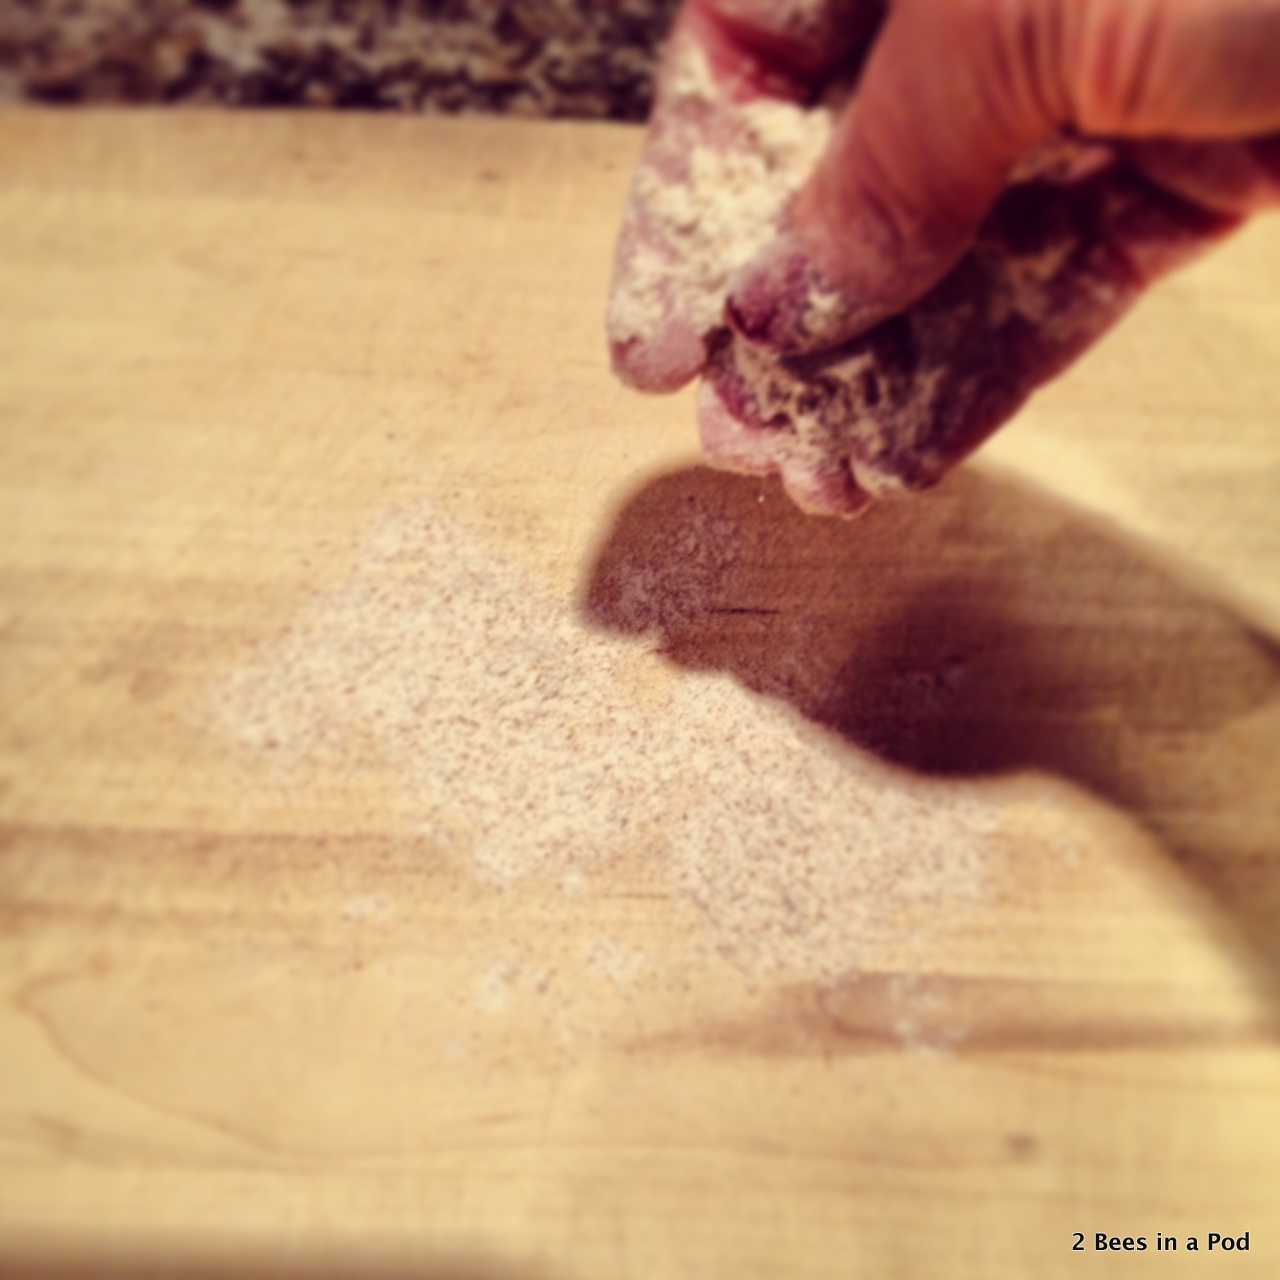 1-Putting flour on surface to roll dough for homemade dog treats